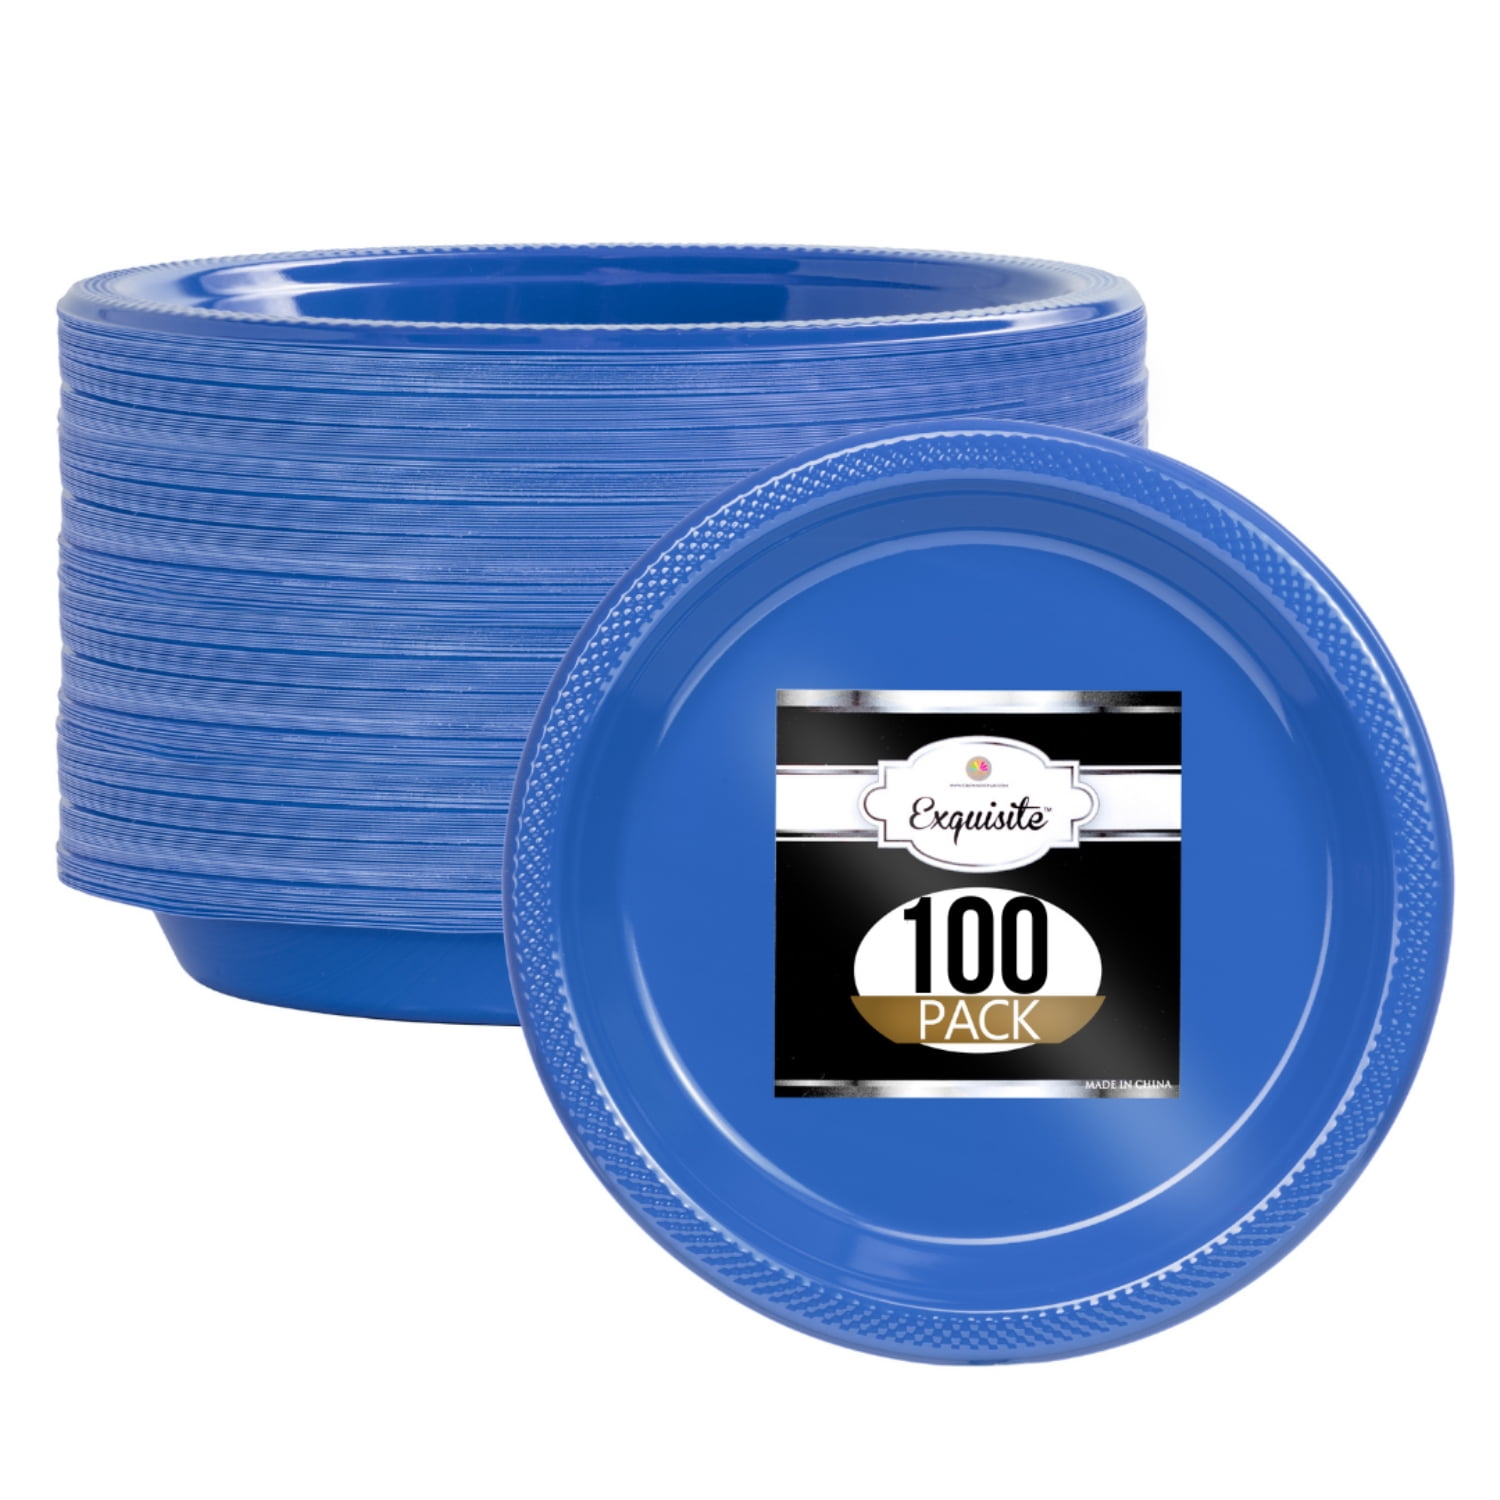 100 PACK) EcoQuality 7.5 inch Round Navy Blue Plastic Plates with